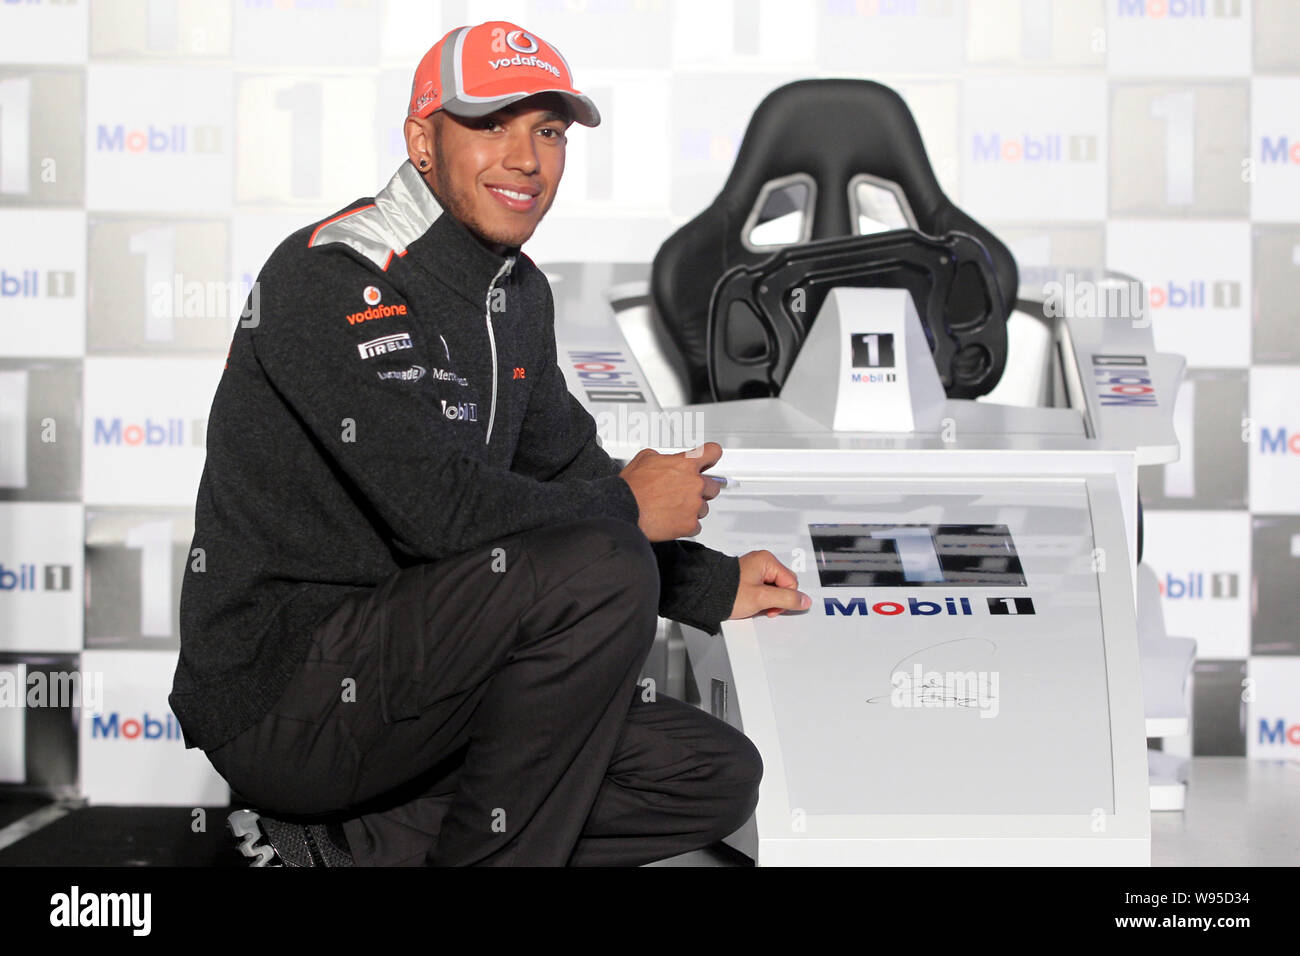 British F1 driver Lewis Hamilton of the McLaren-Mercedes team poses with a F1 racing car simulator during a promotional event by Mobile in Shanghai, C Stock Photo